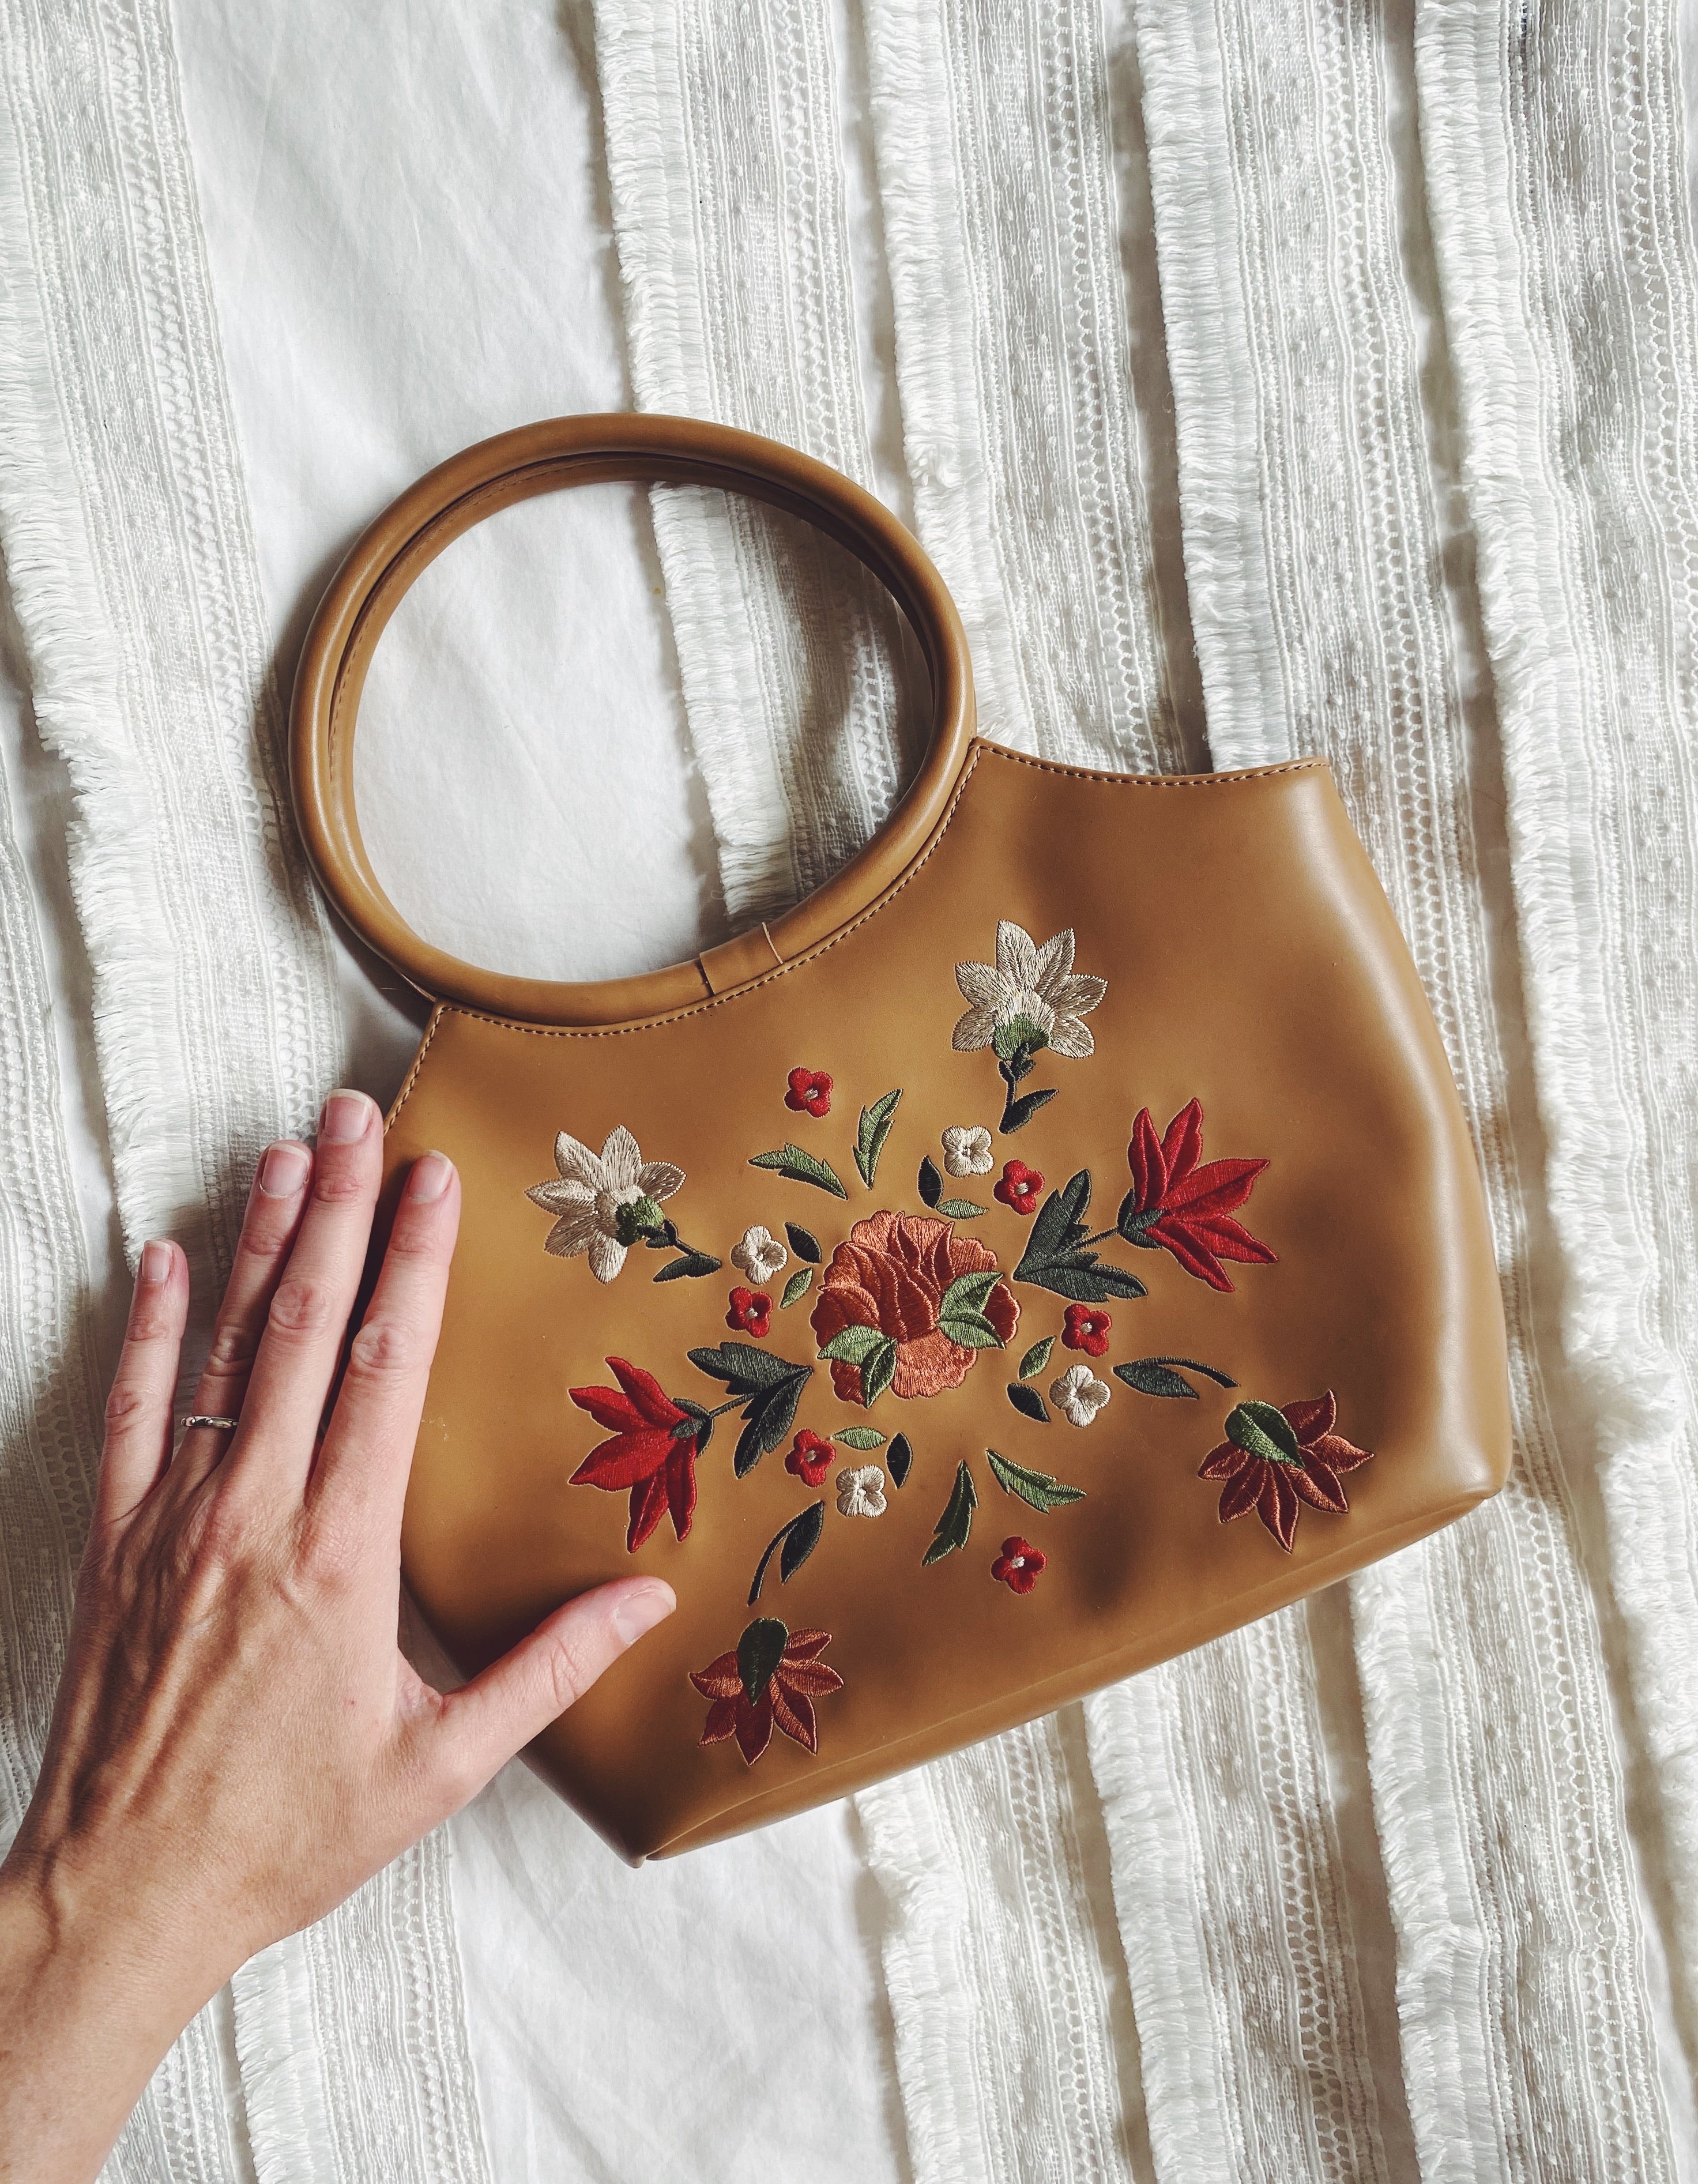 Floral Embroidered Faux Leather Handbag